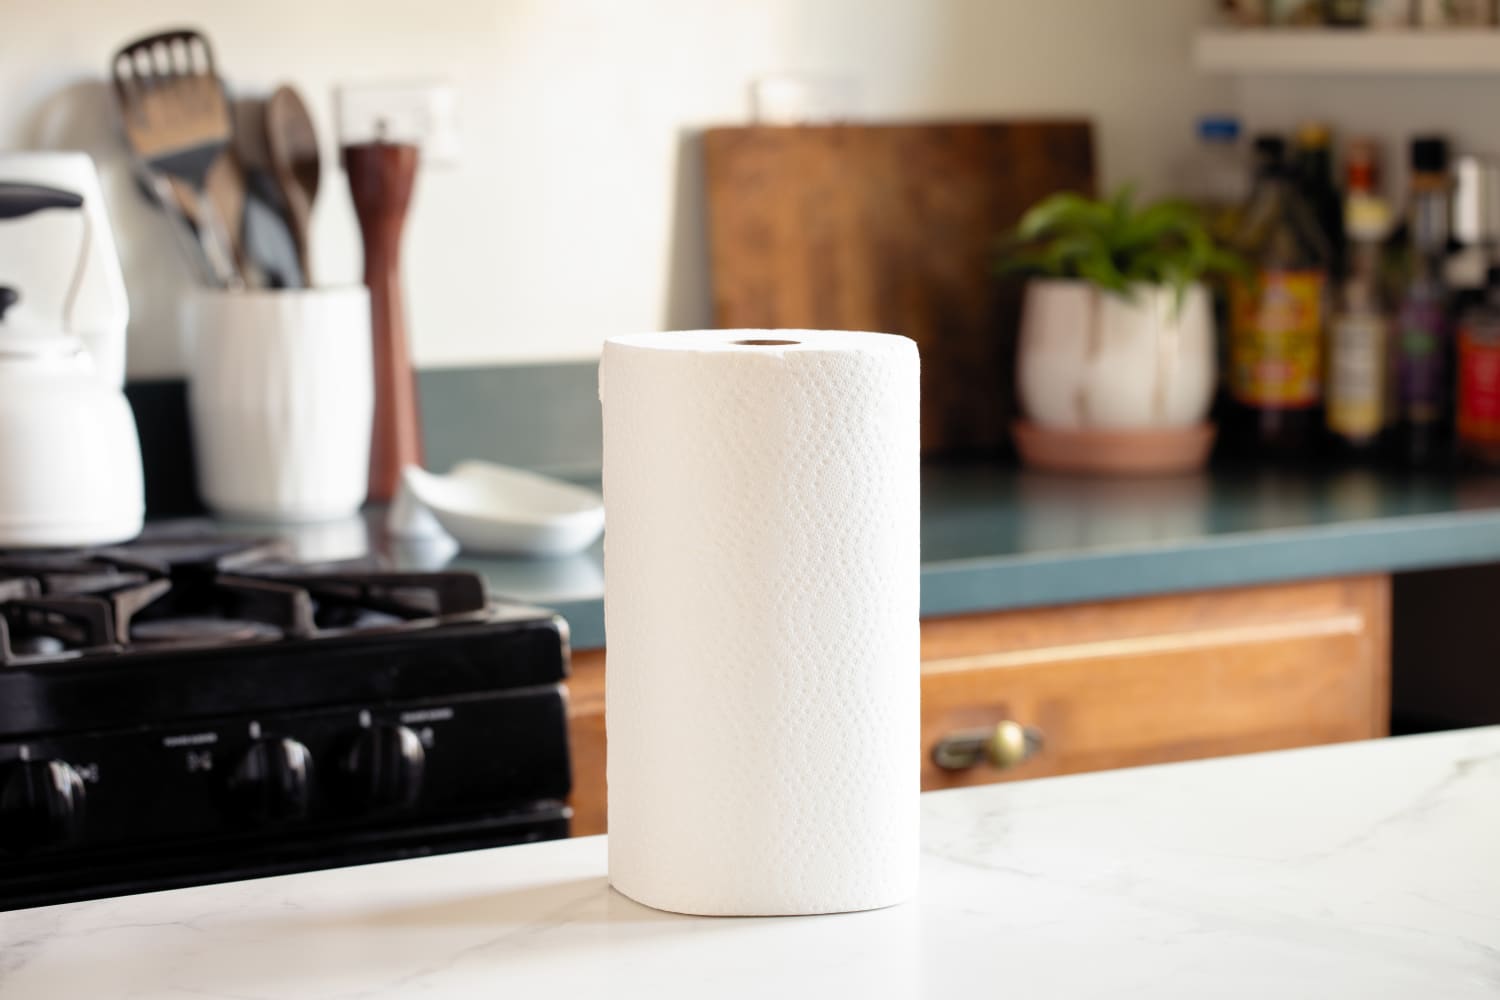 Amazon Shoppers Swear By This Paper Towel With an Ingenious Feature (It Has More Than 7,200 5-Star Reviews!)